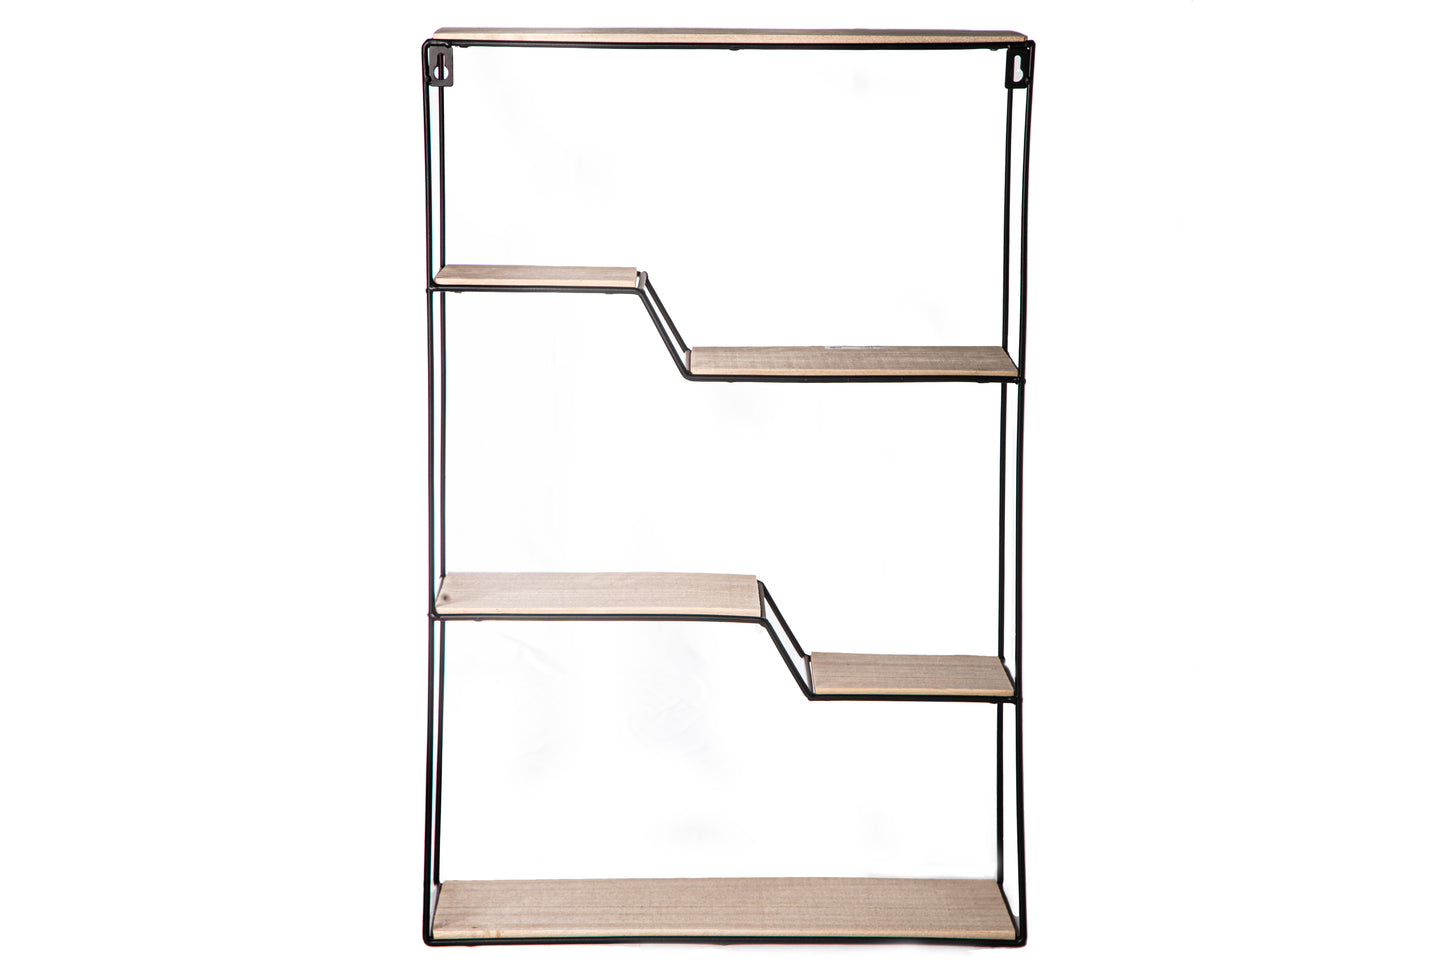 Metal Rectangle Wall Shelf in a Box with Top Wooden Surface and Steplad Design Tiers